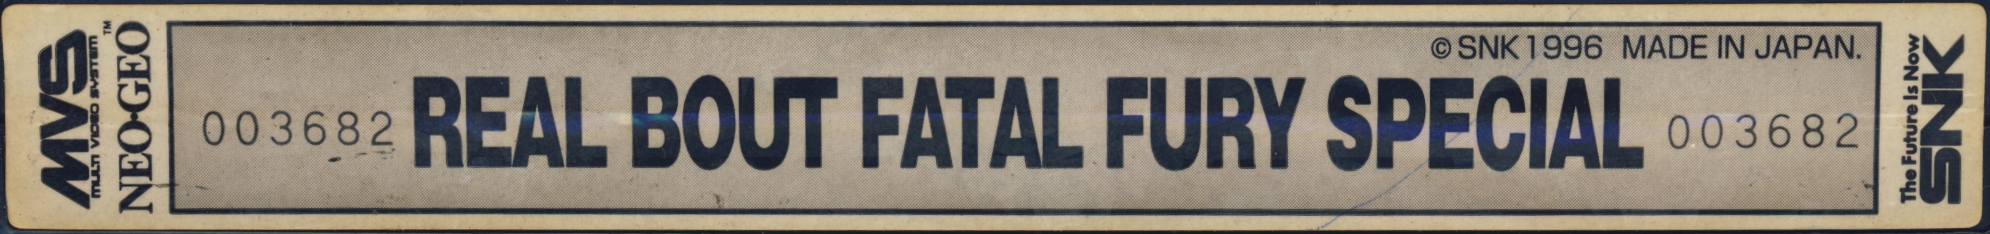 Real bout fatal fury special us label.jpg